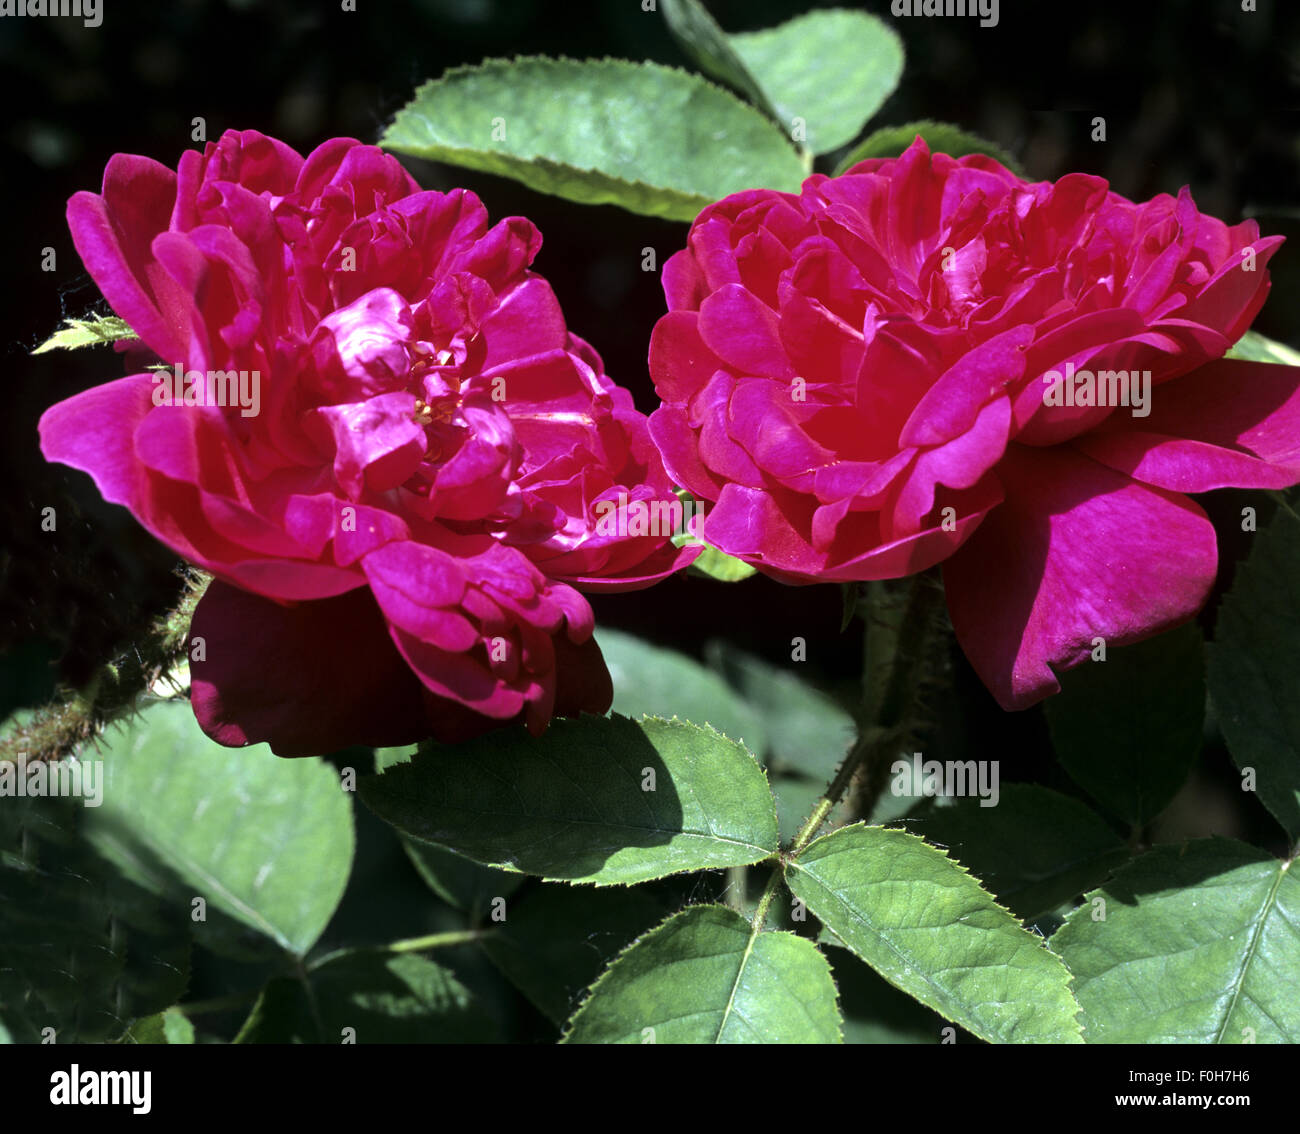 images and - photography Moosrose hi-res Alamy stock